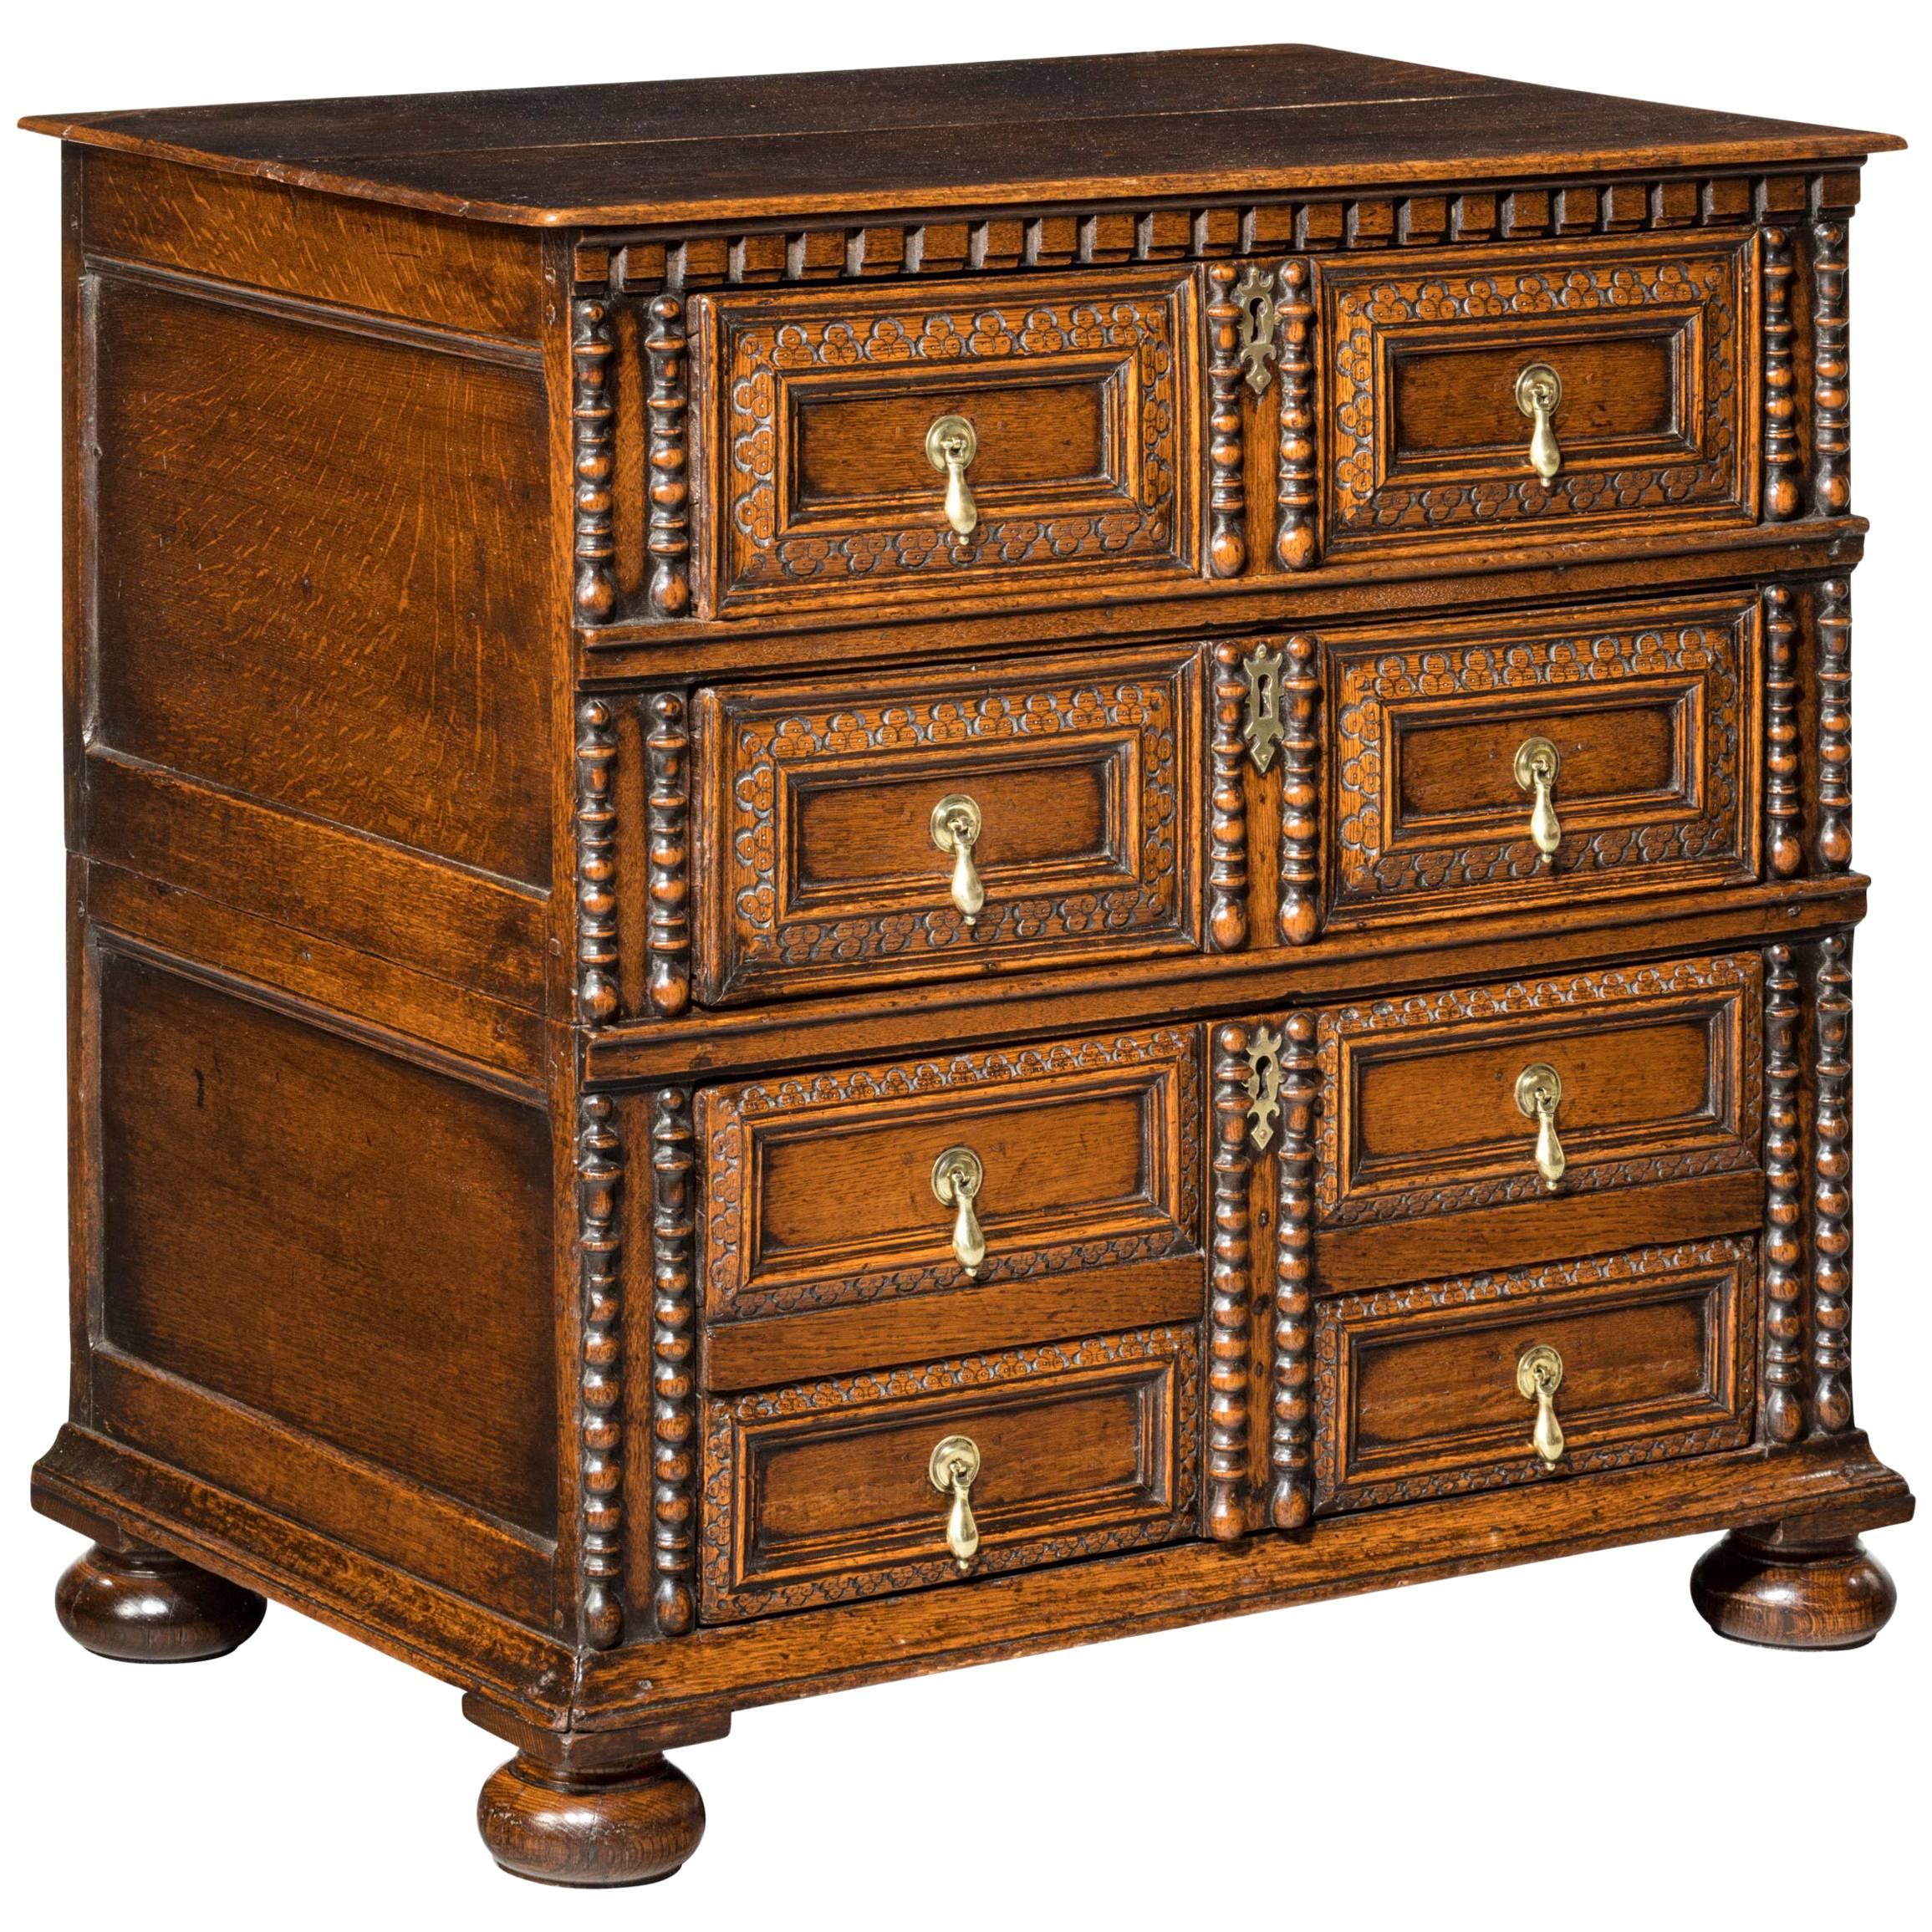 Late 17th Century Oak Chest of Drawers with Scratch and Deep Carving